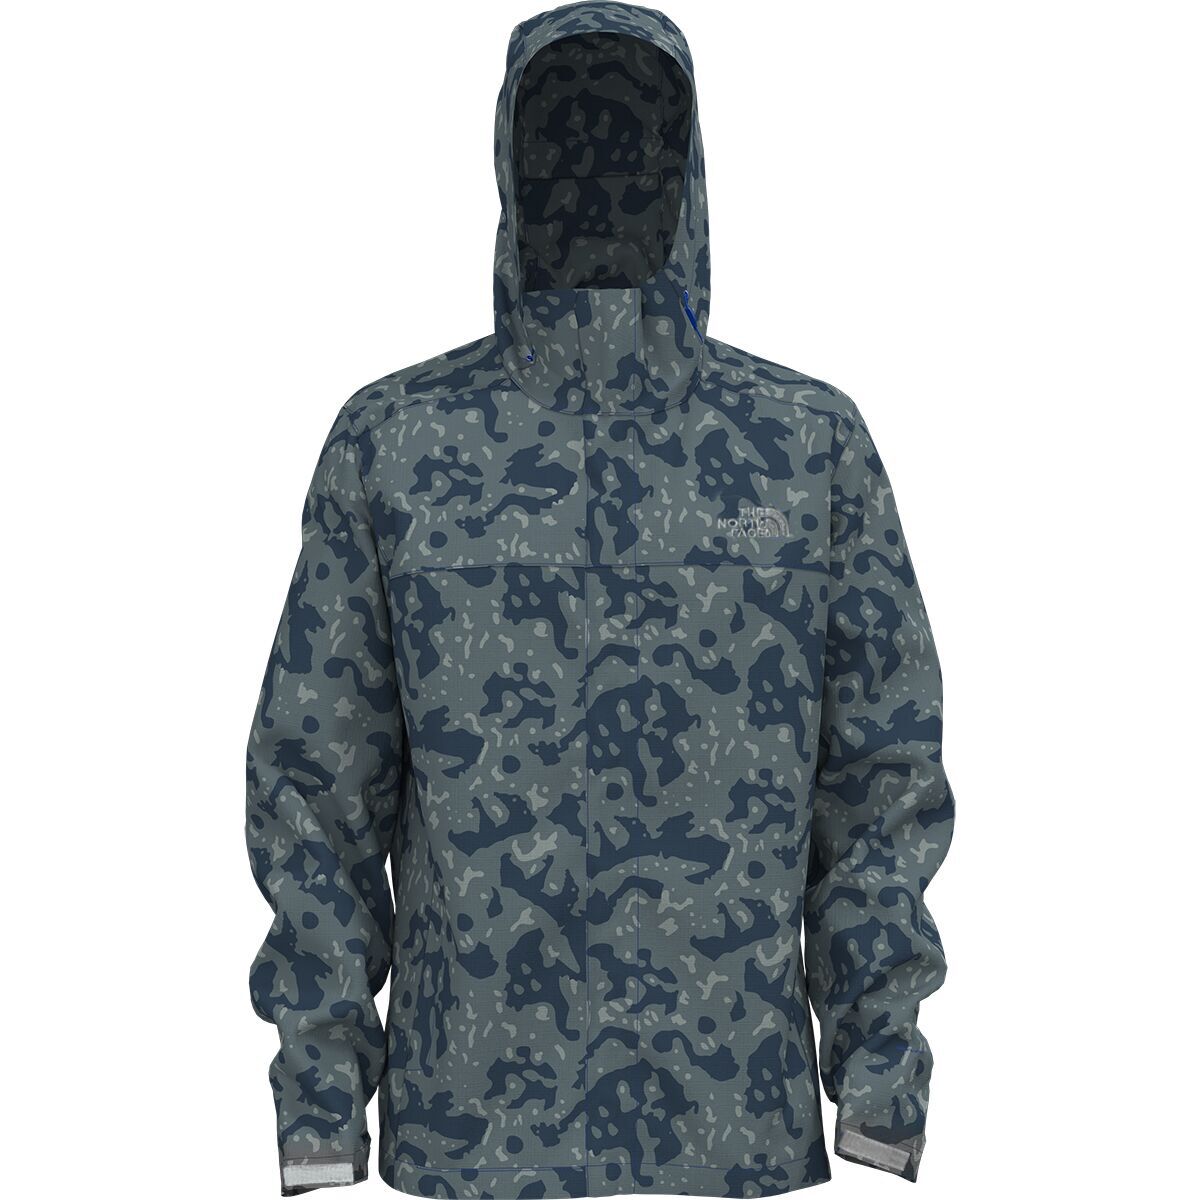 The North Face Printed Venture 2 Jacket - Men's